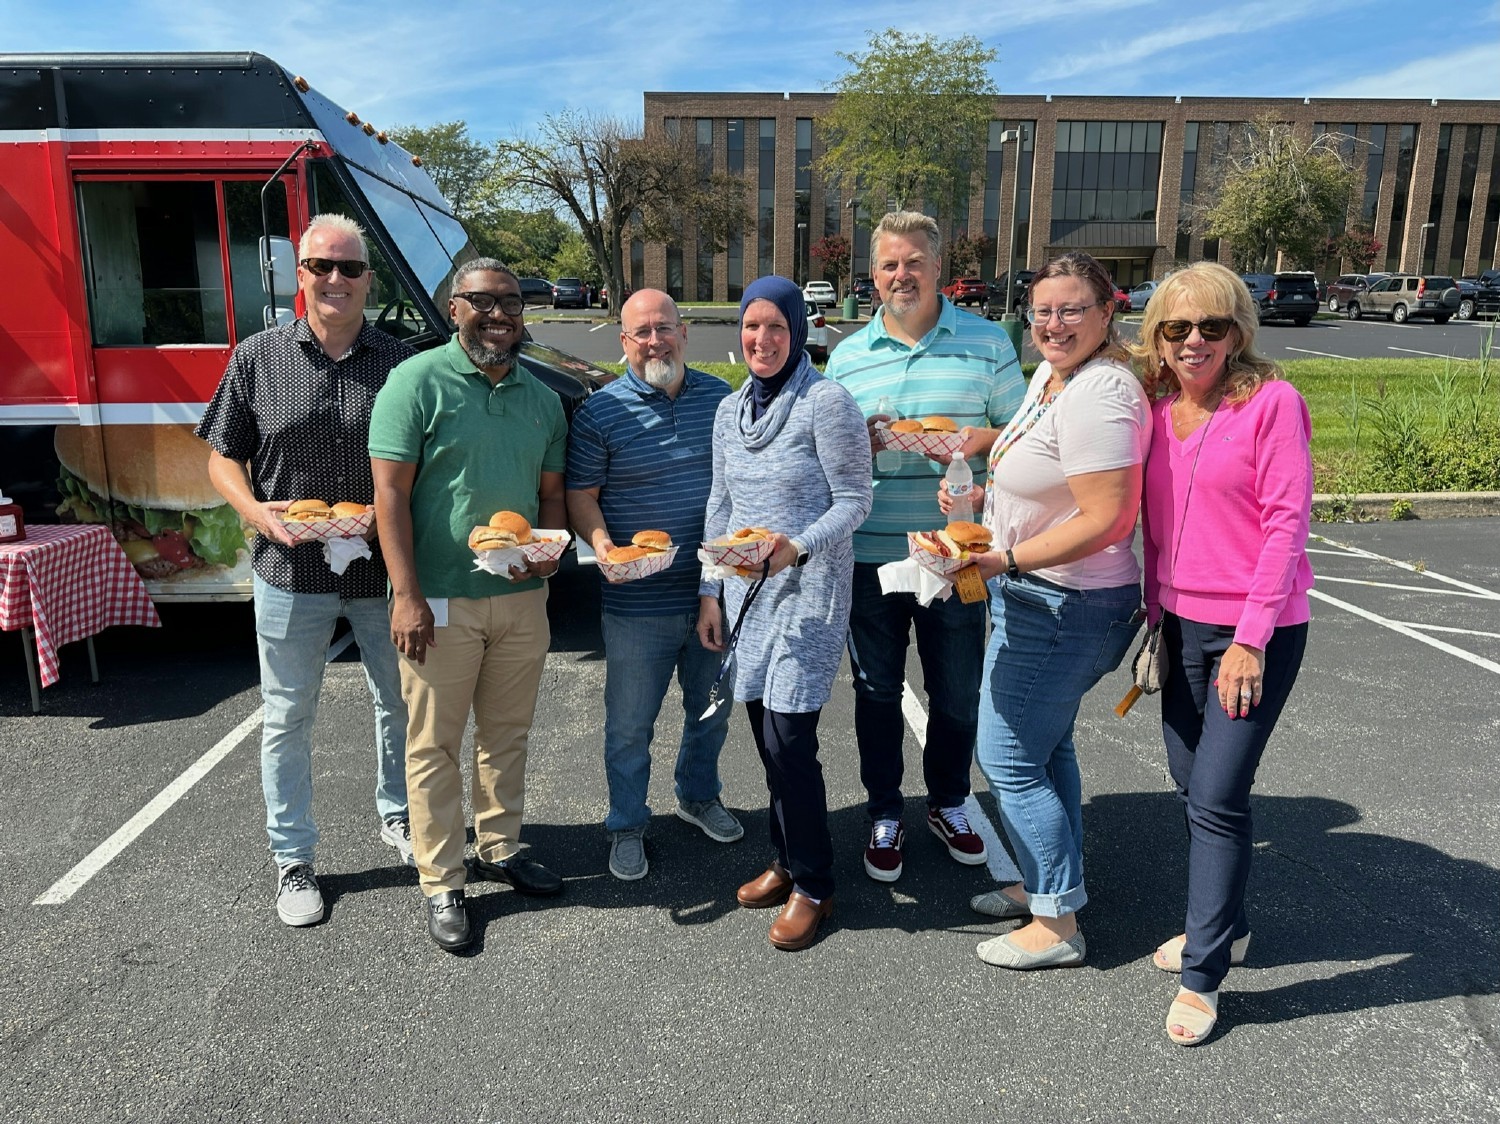 Flagship rolled in food trucks to feed associates during their mid-year celebrations.